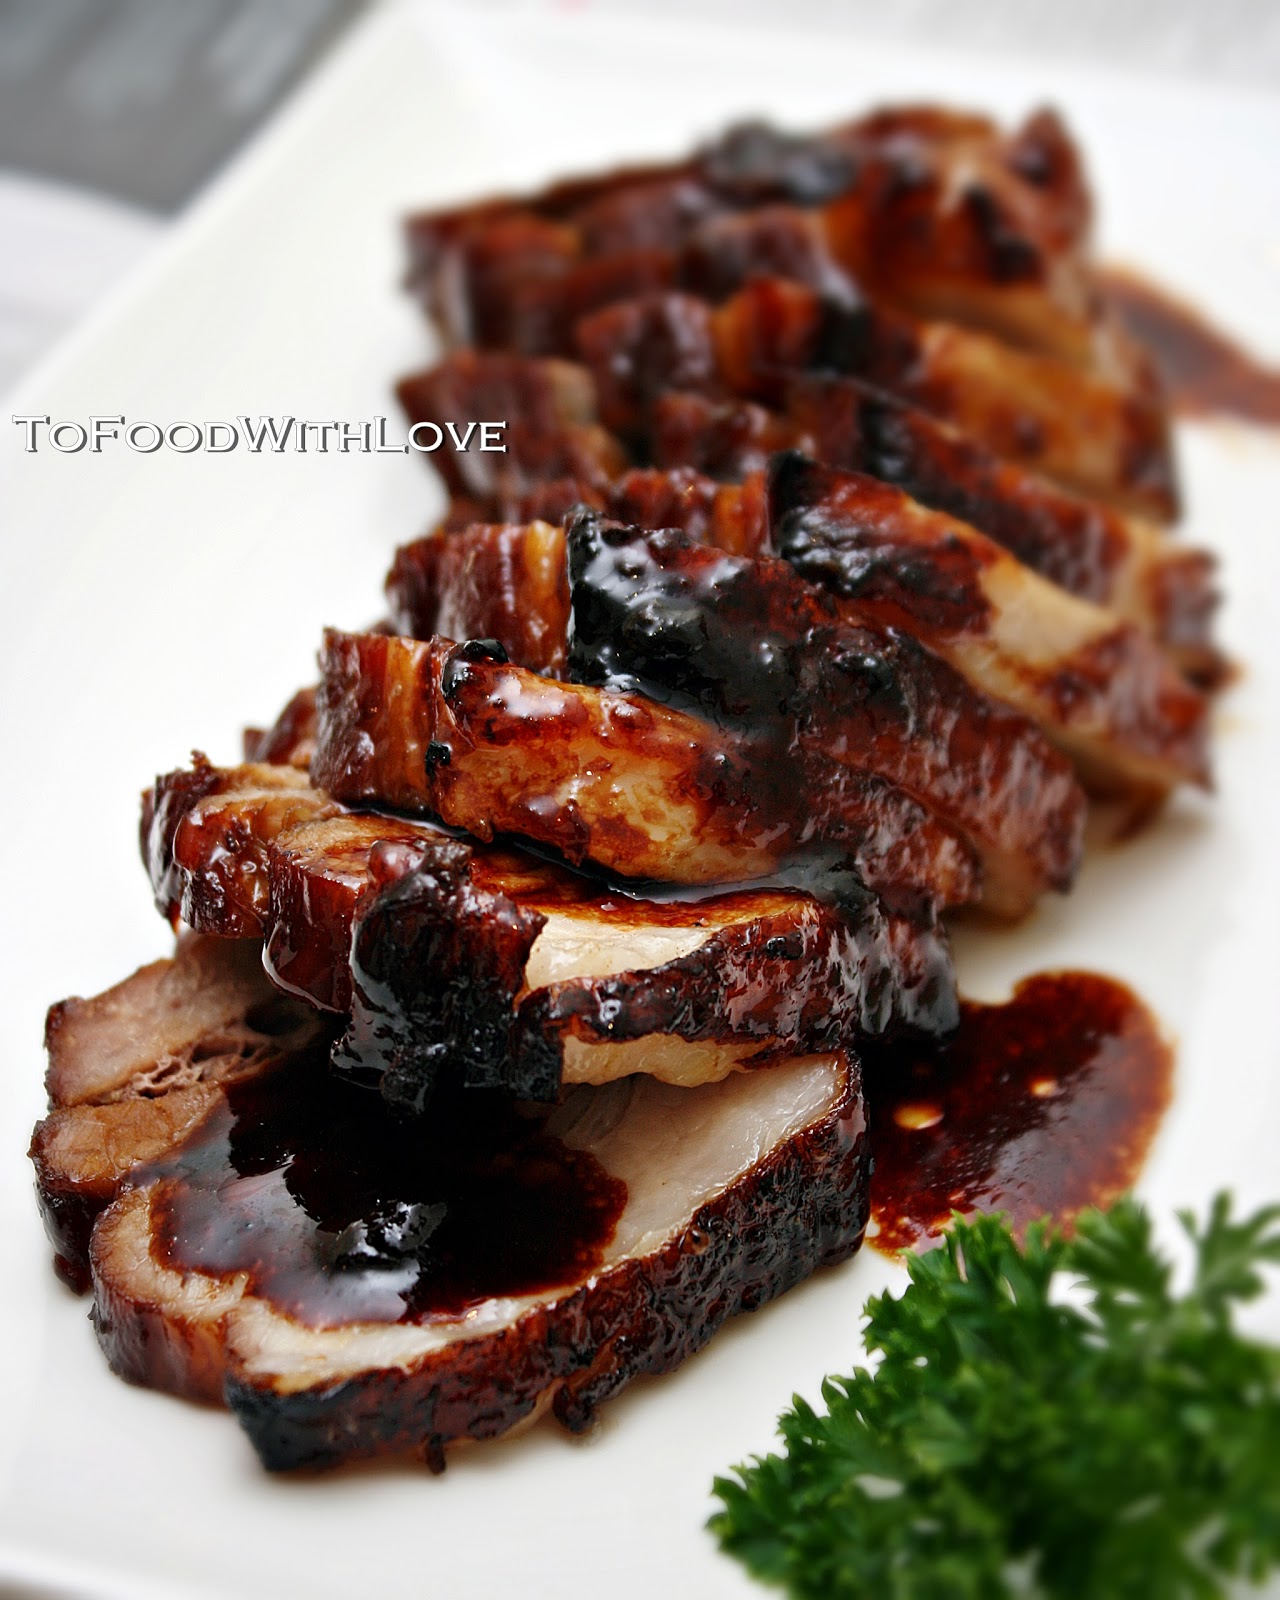 To Food with Love: Slow-Cooker Char Siew (Chinese Barbecued Pork)